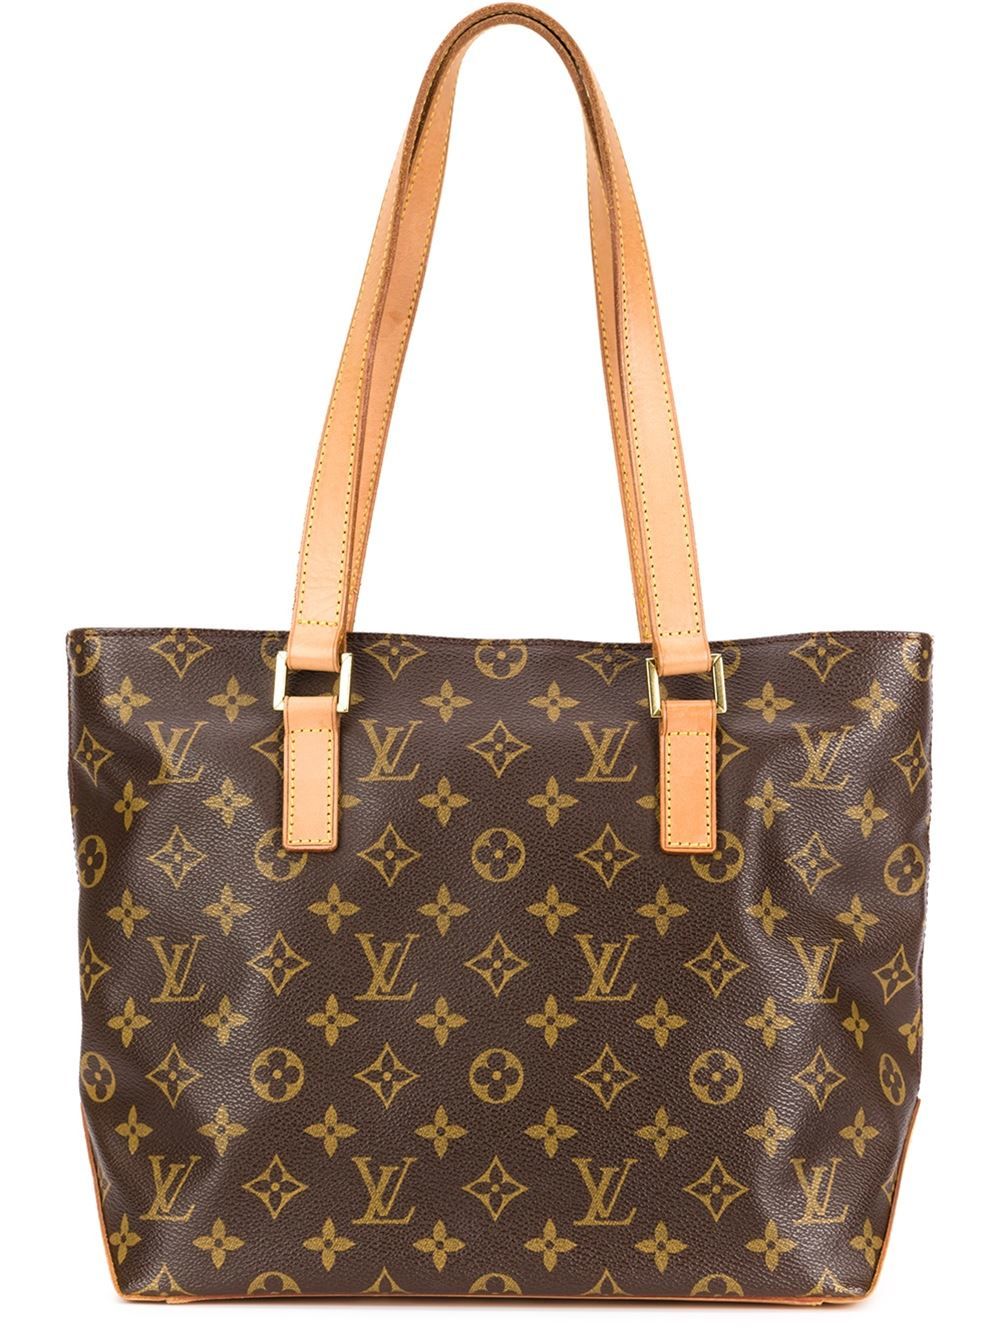 Louis vuitton Mogrammed Tote in Brown | Lyst